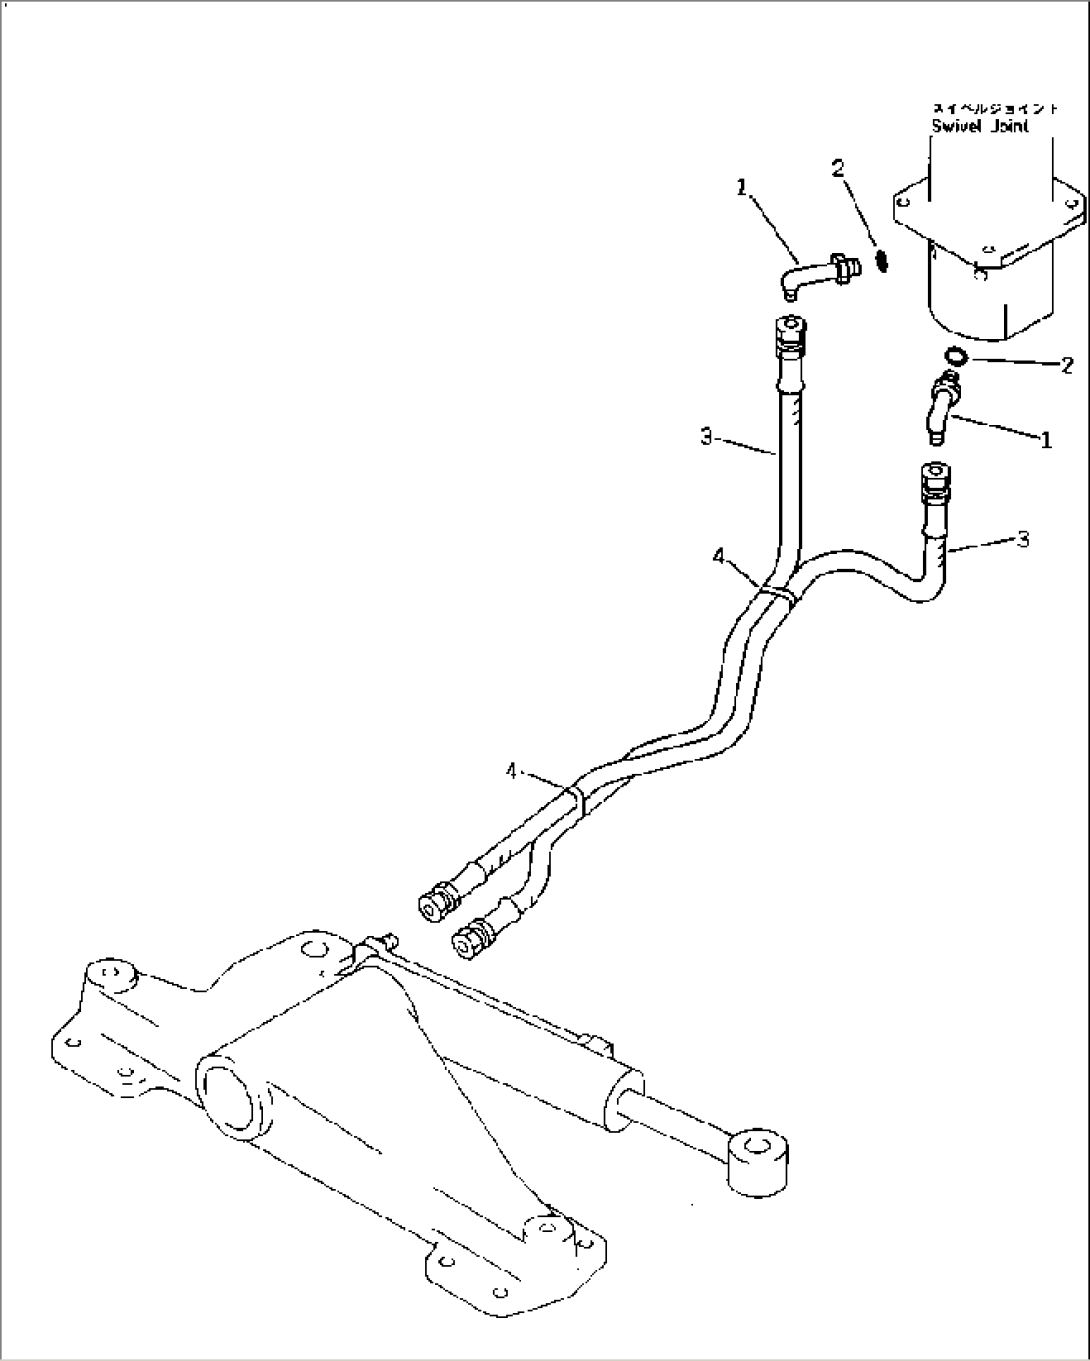 STEERING PIPING (2/3) (SWIVEL JOINT TO CYLINDER)